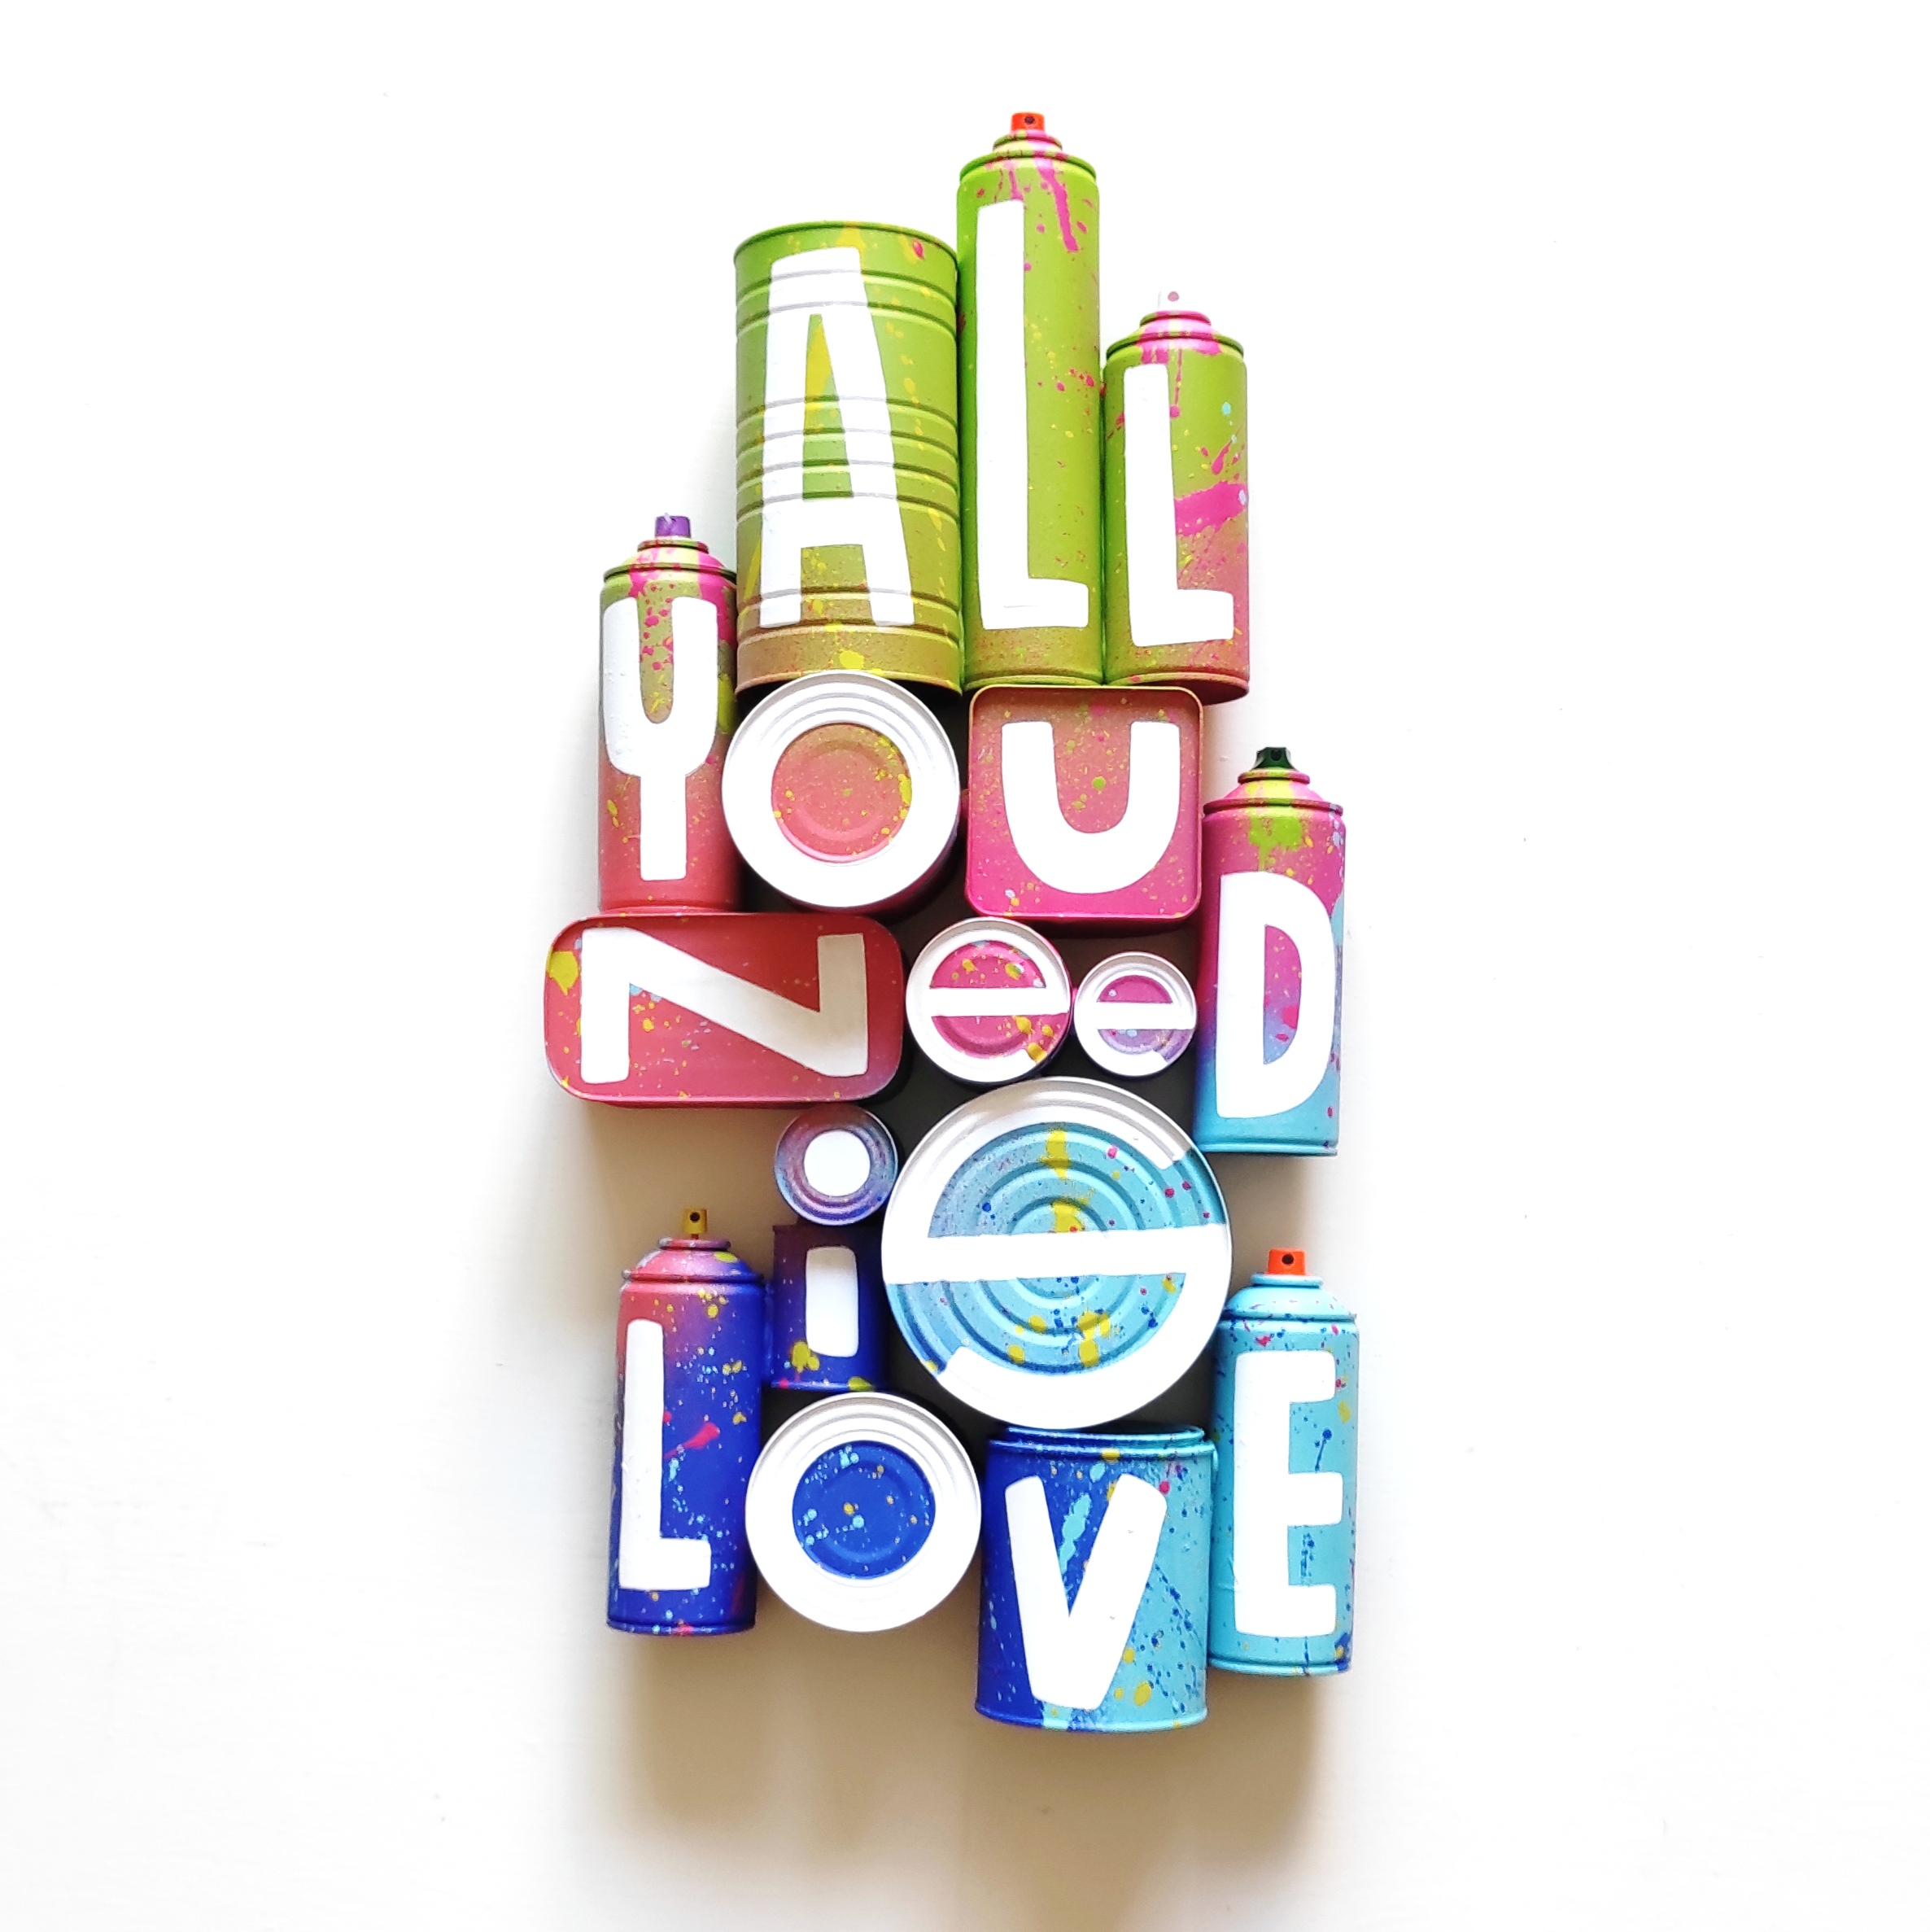 Me Lata, All you need is love, 36x73x11cm, Cans, spraypaint and acrylic, 2022